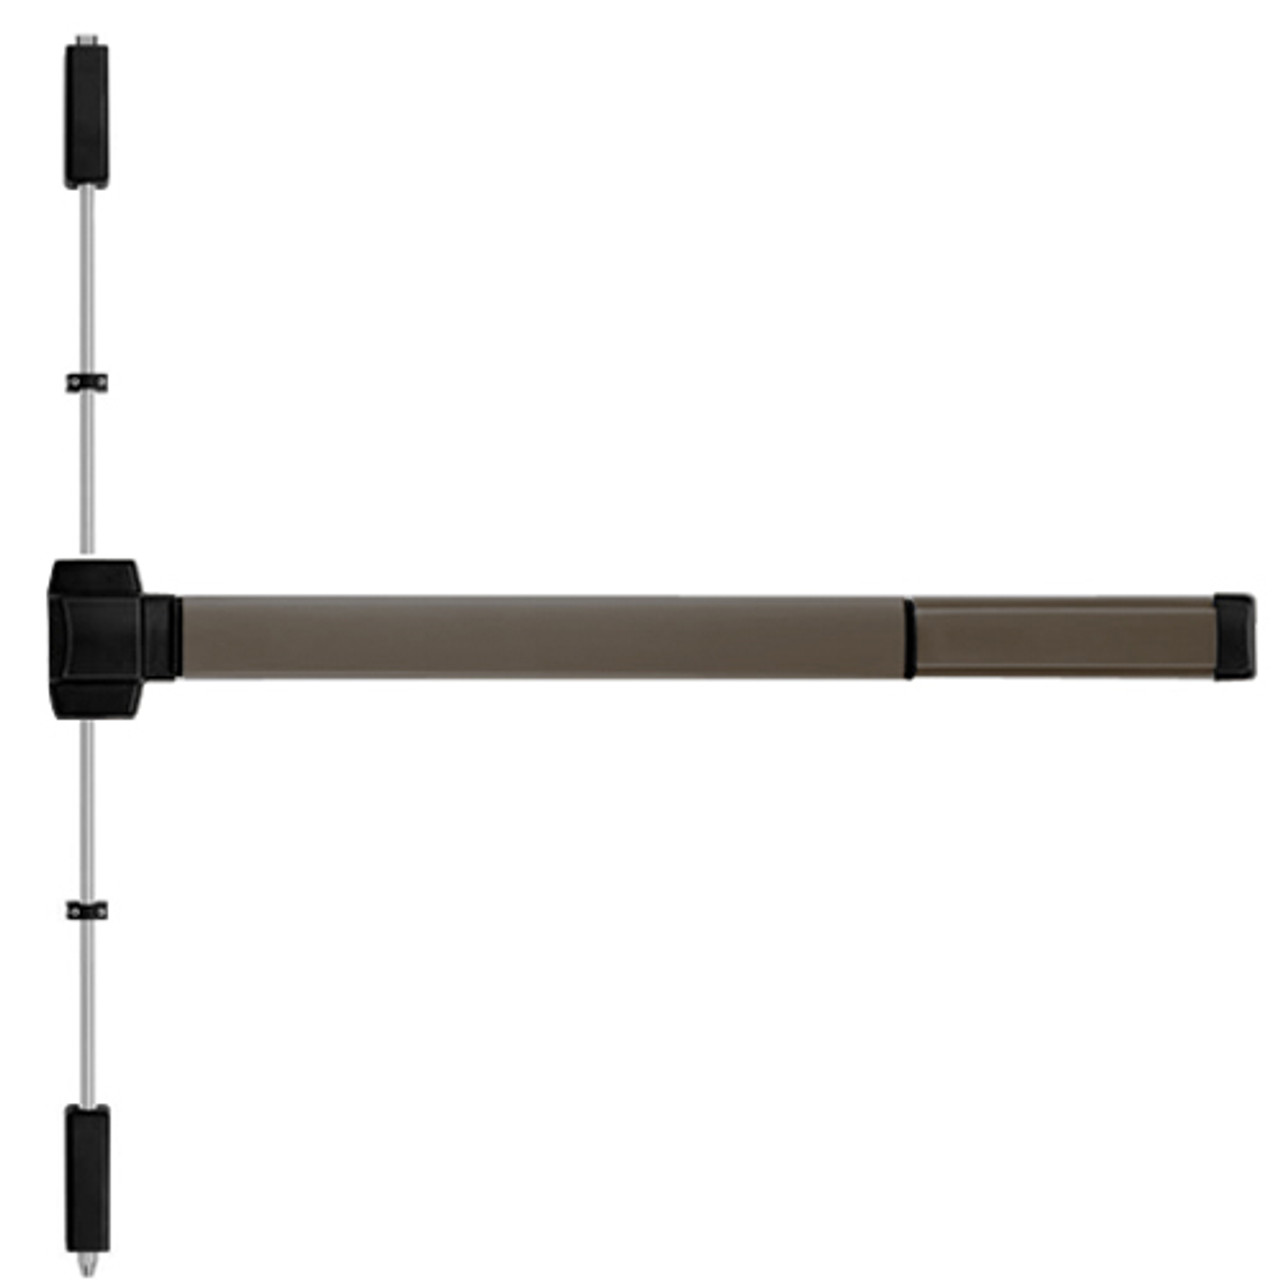 5202CDLBR-695-48 PHI 5000 Series Non Fire Rated Reliant Surface Vertical Rod Device Prepped for Dummy Trim in Dark Bronze Powder Coat Finish